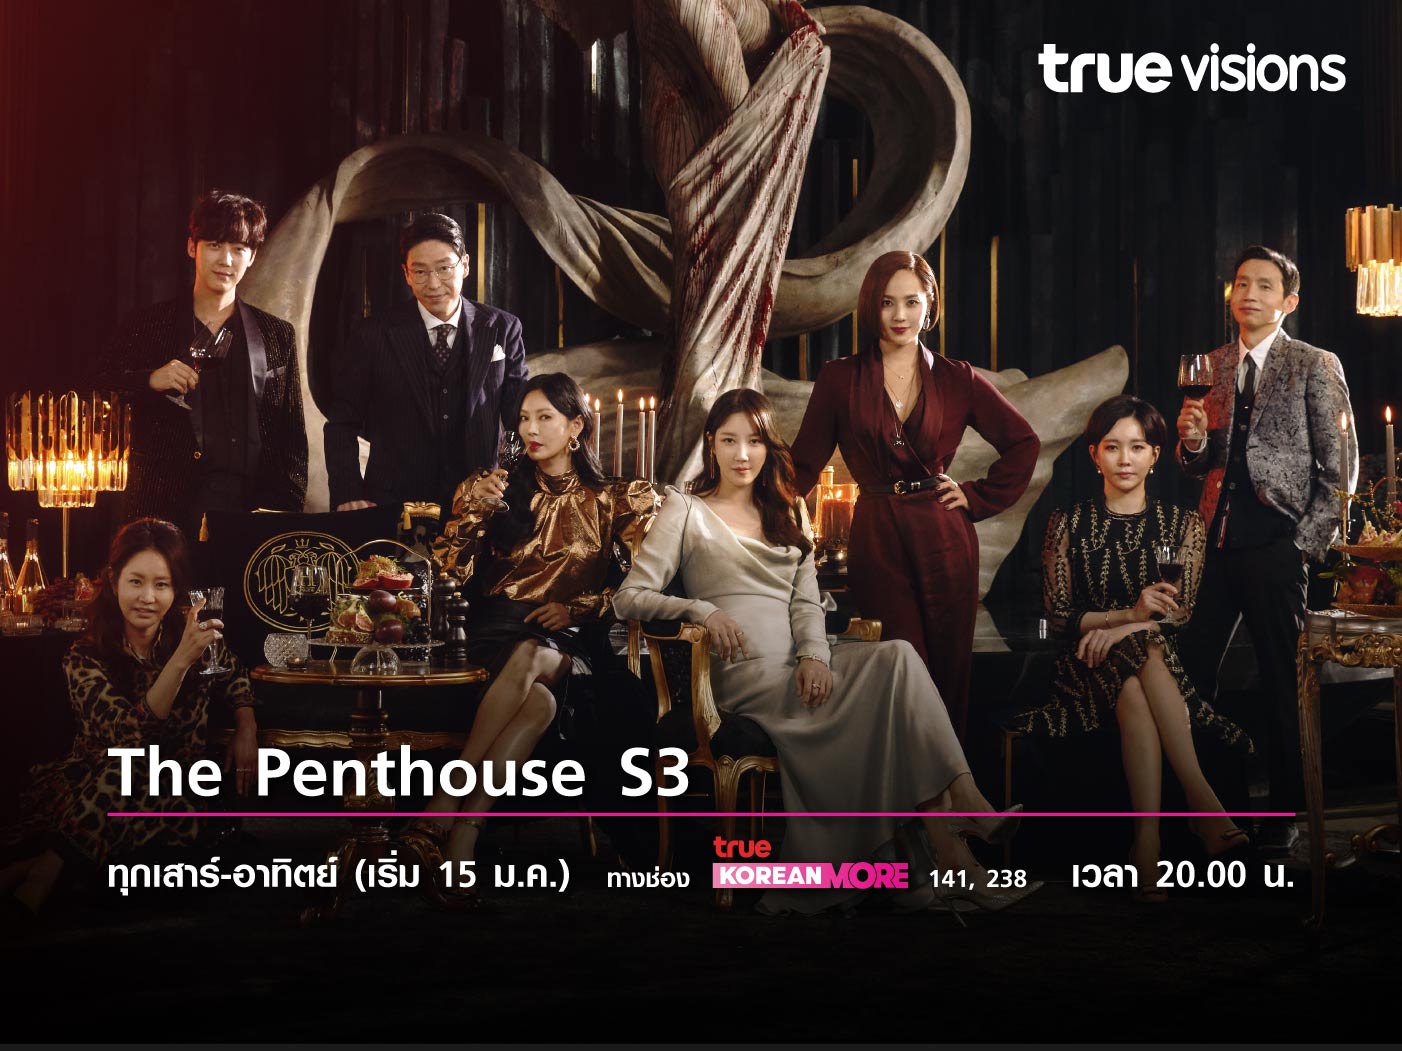 The Penthouse S3